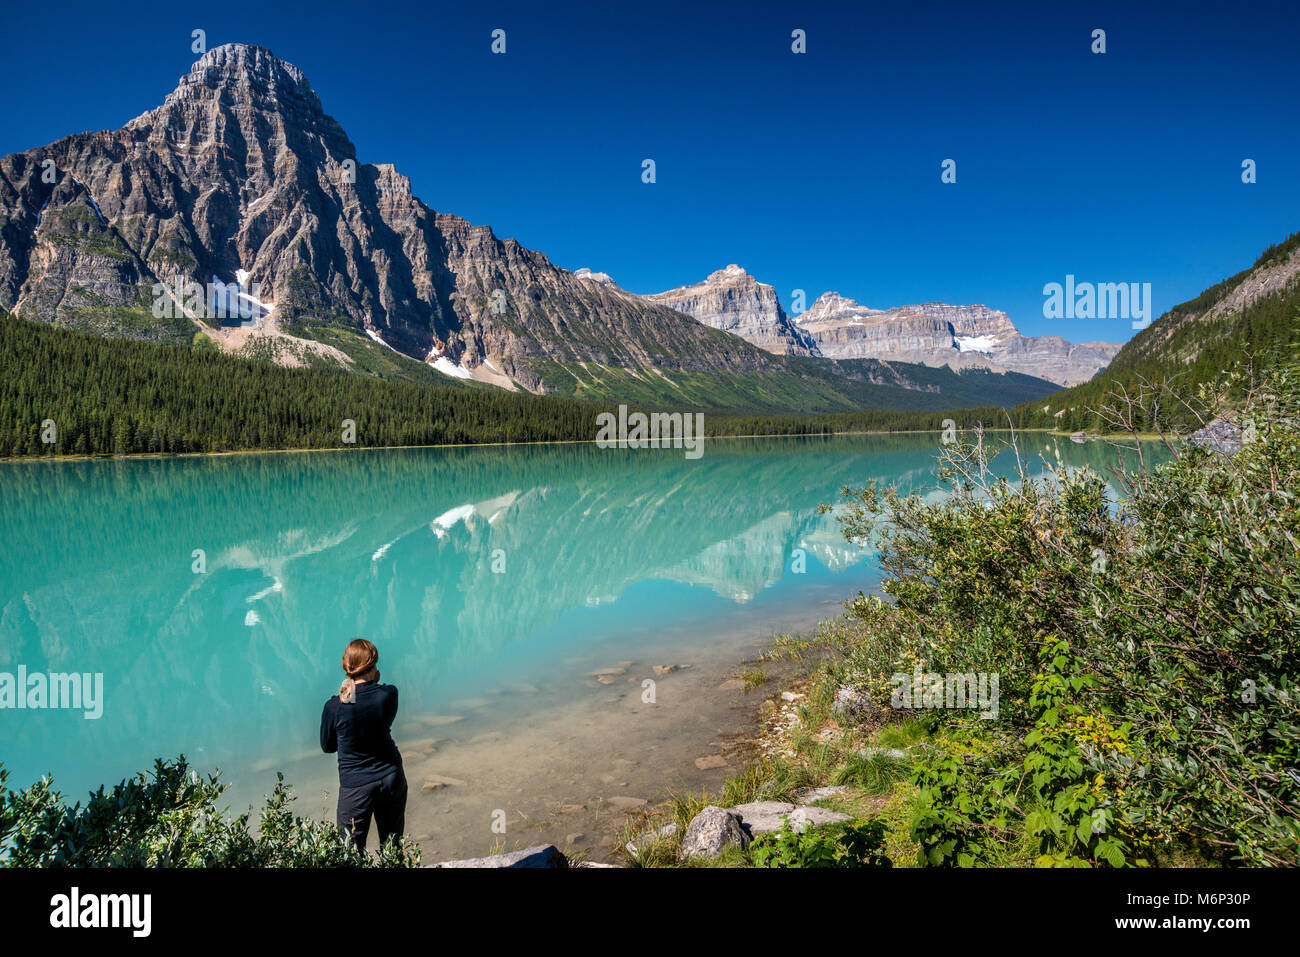 Young woman at Lower Waterfowl Lake, Mount Chephren in Waputik Mountains, from The Icefields Parkway, Banff National Park, Alberta, Canada Stock Photo